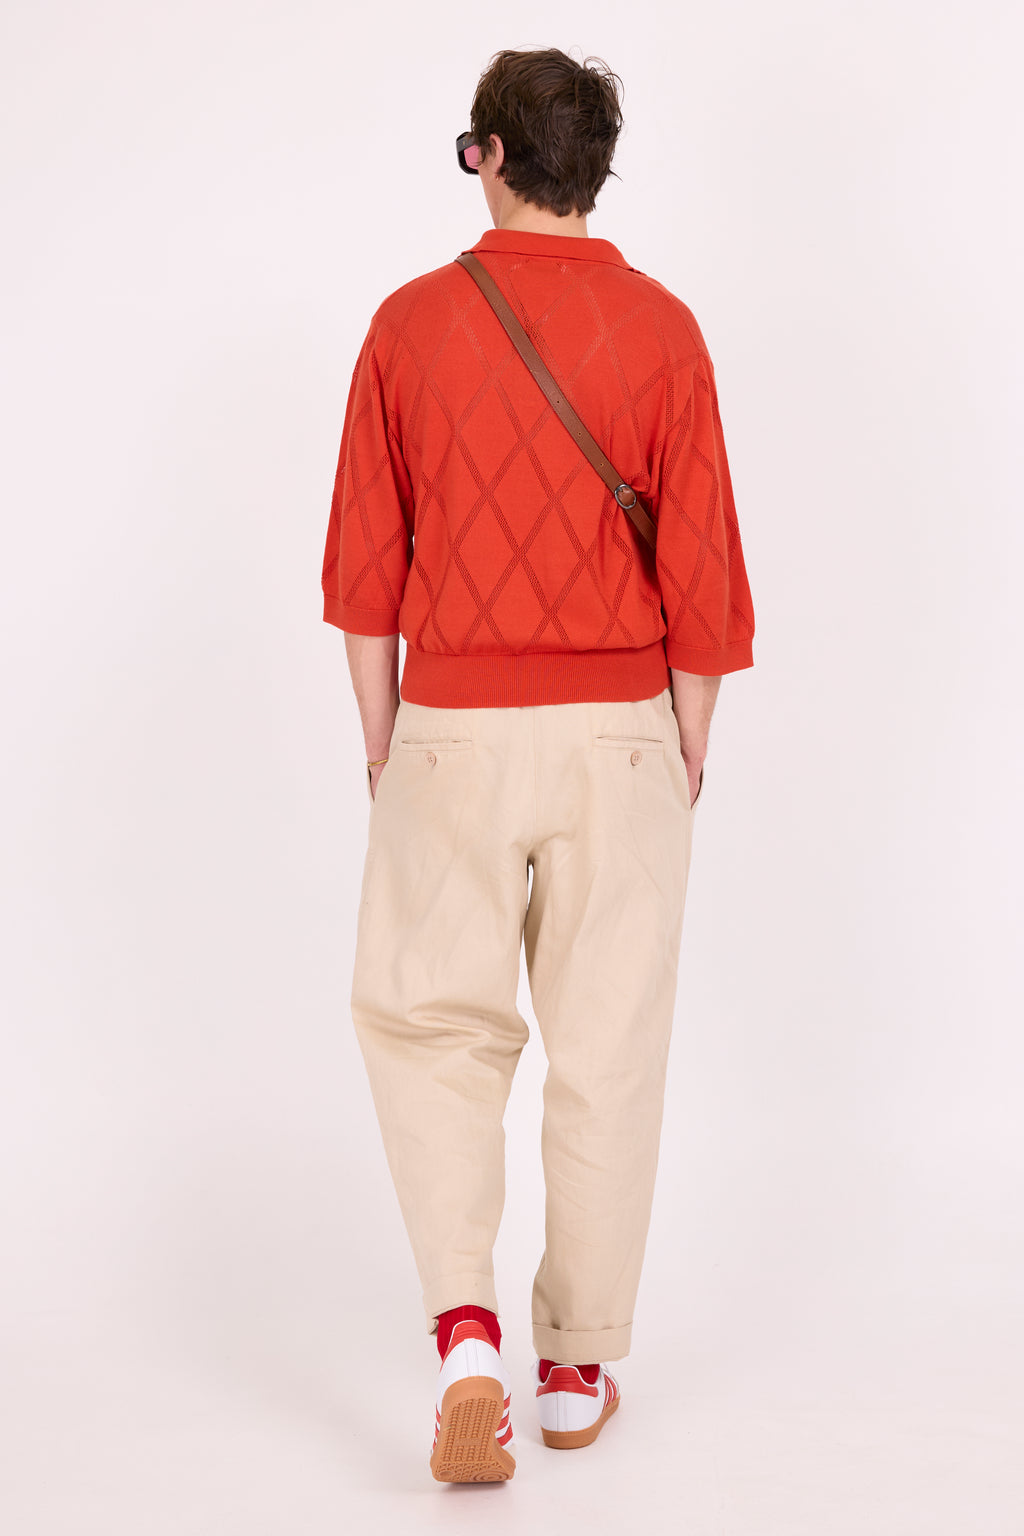 Socos smoked pepper polo sweater